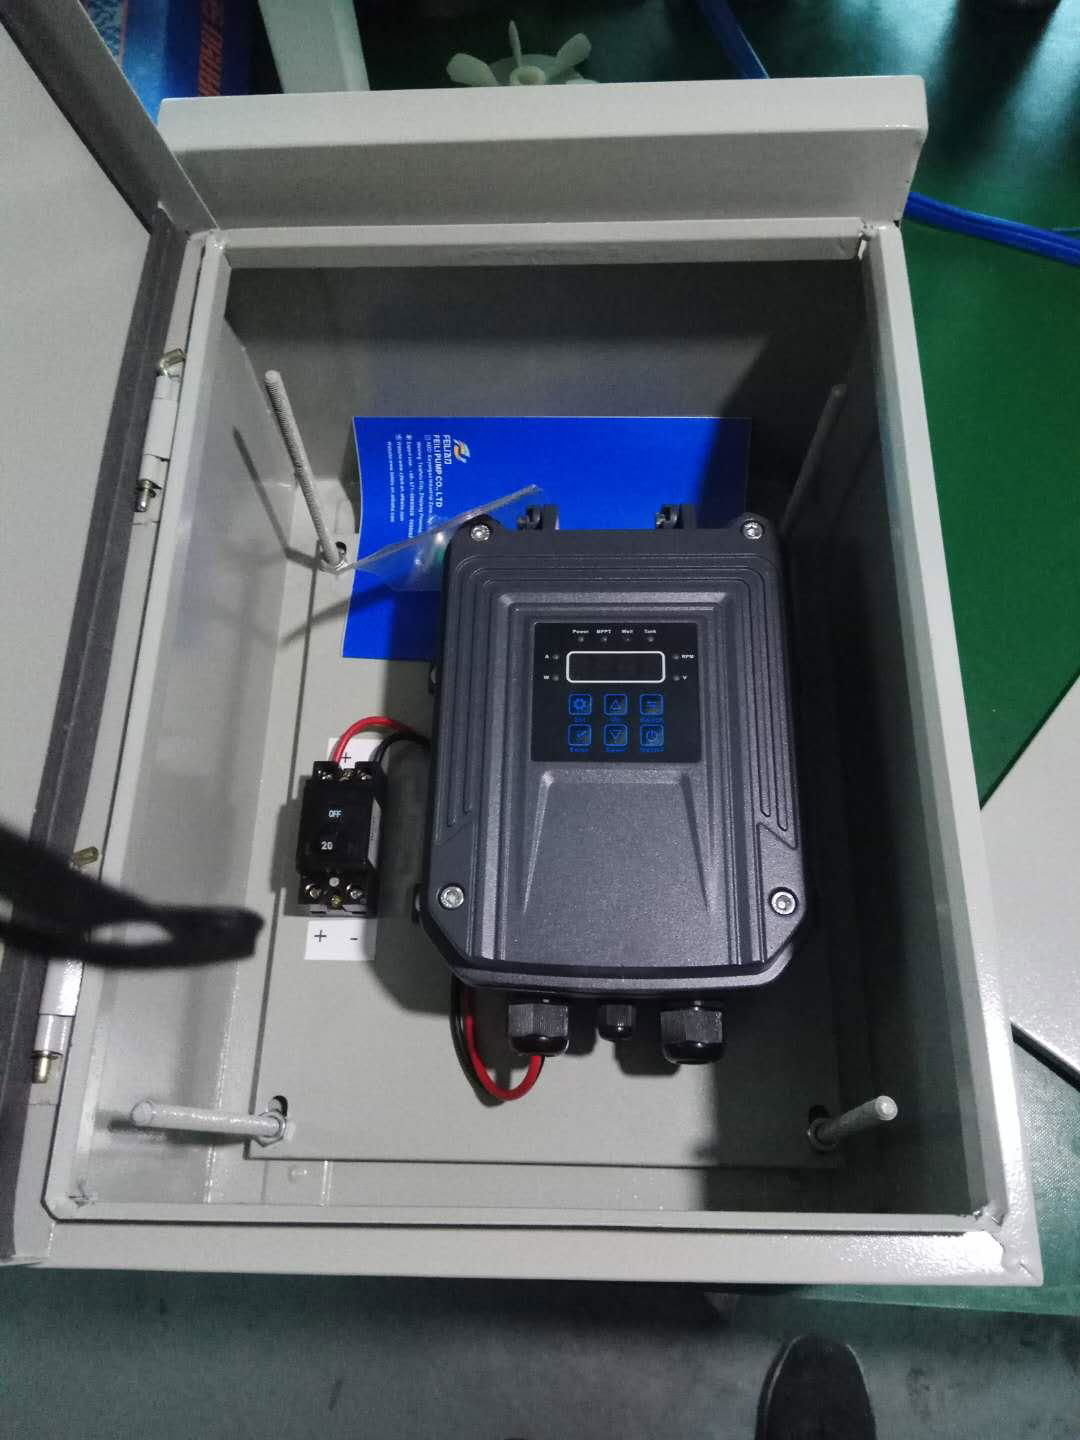 pump sbmersible solar 24v cell  lift the solar water price in malaysia dc 2